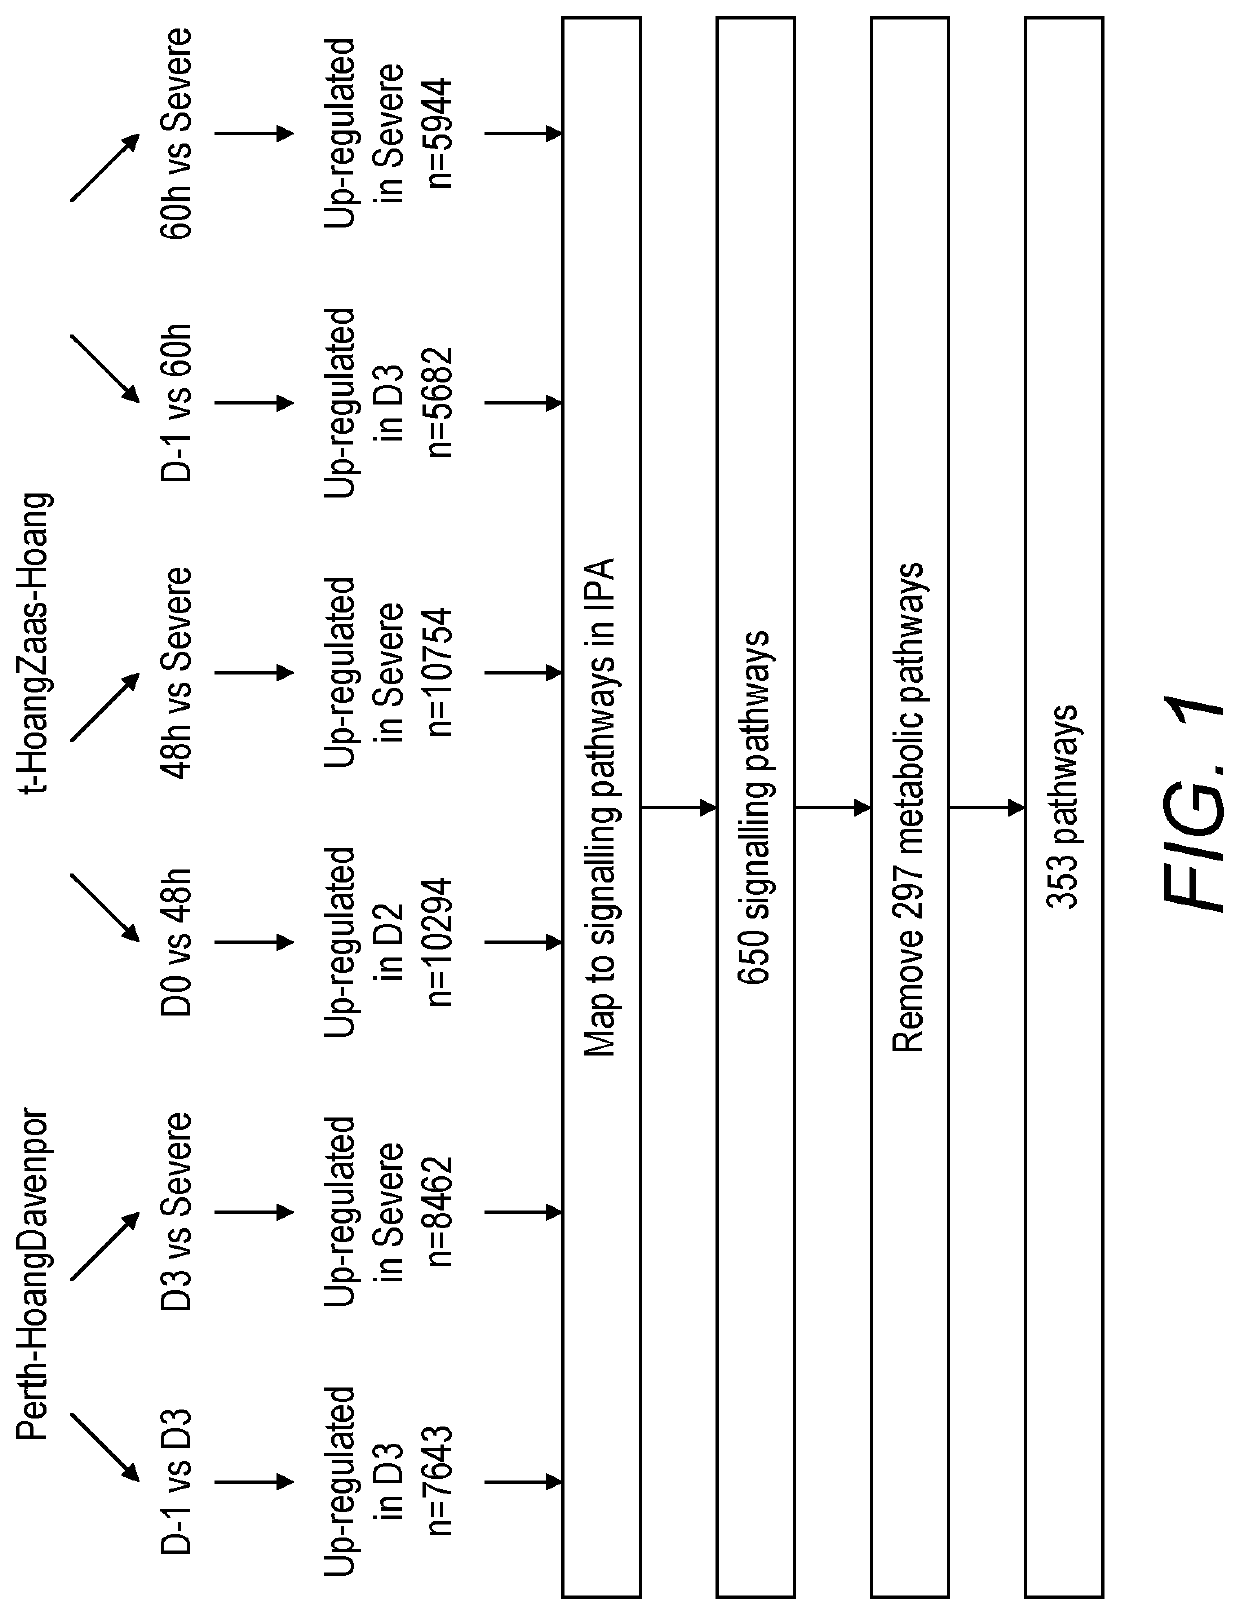 Methods and compounds for the treatment or prevention of hypercytokinemia and severe influenza